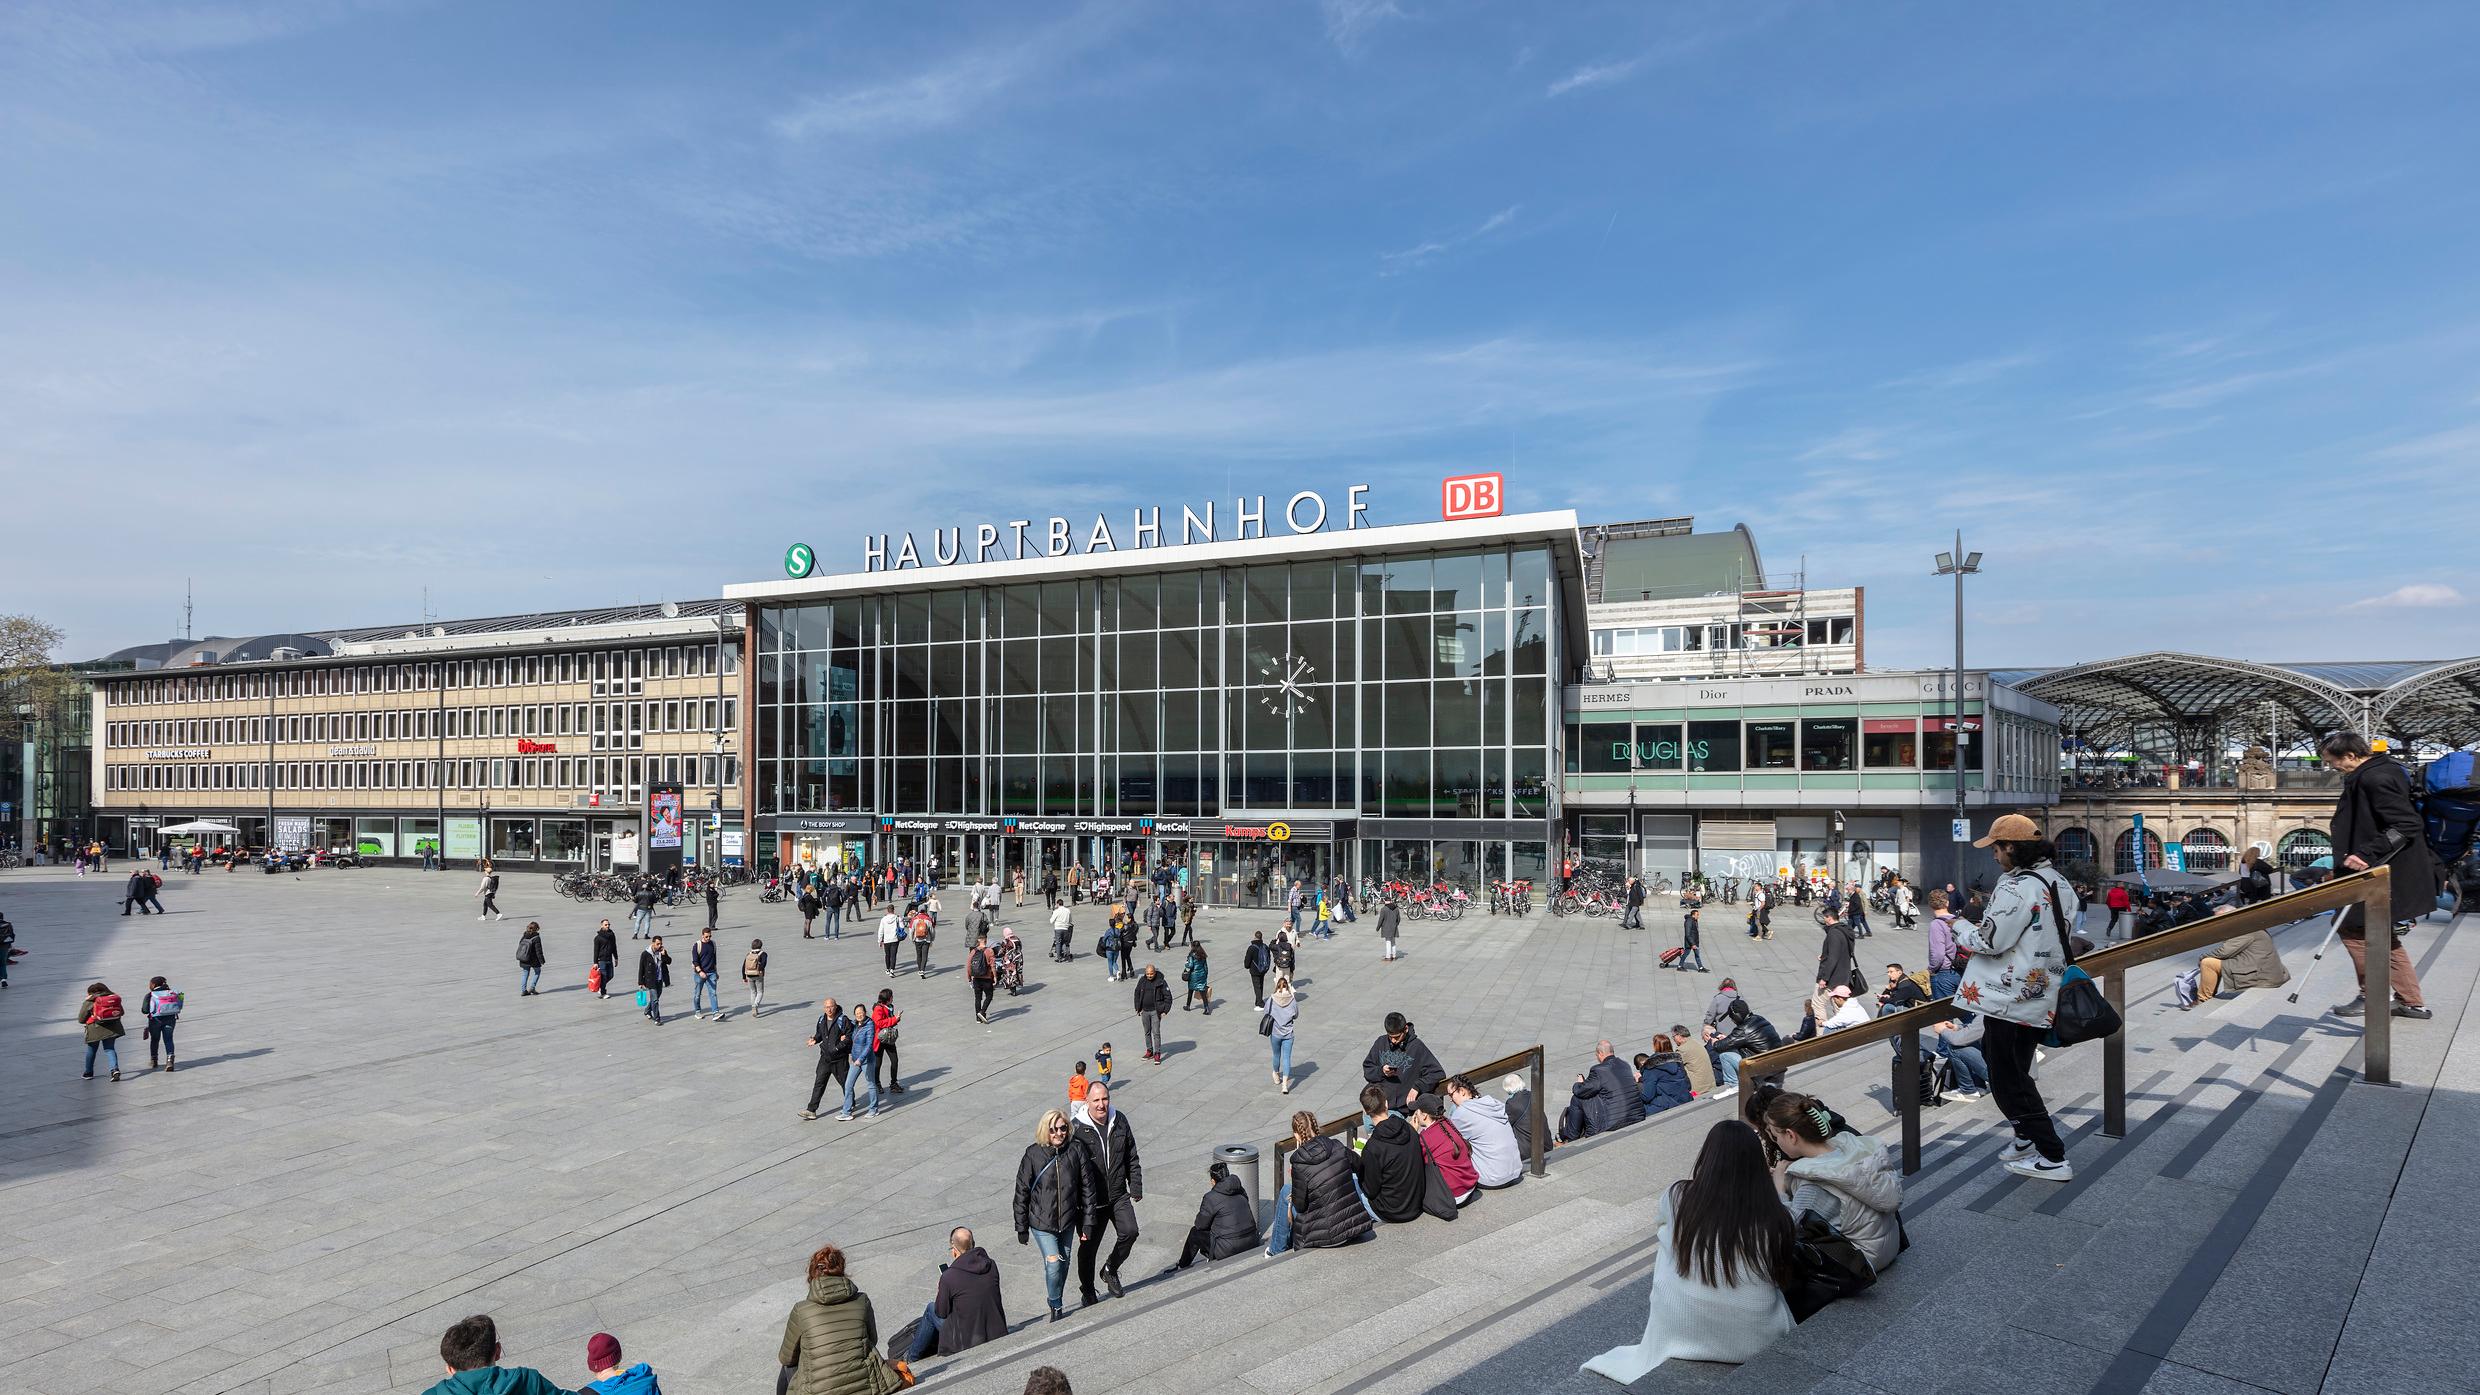 The view of the station building and the station forecourt of Köln Hauptbahnhof.